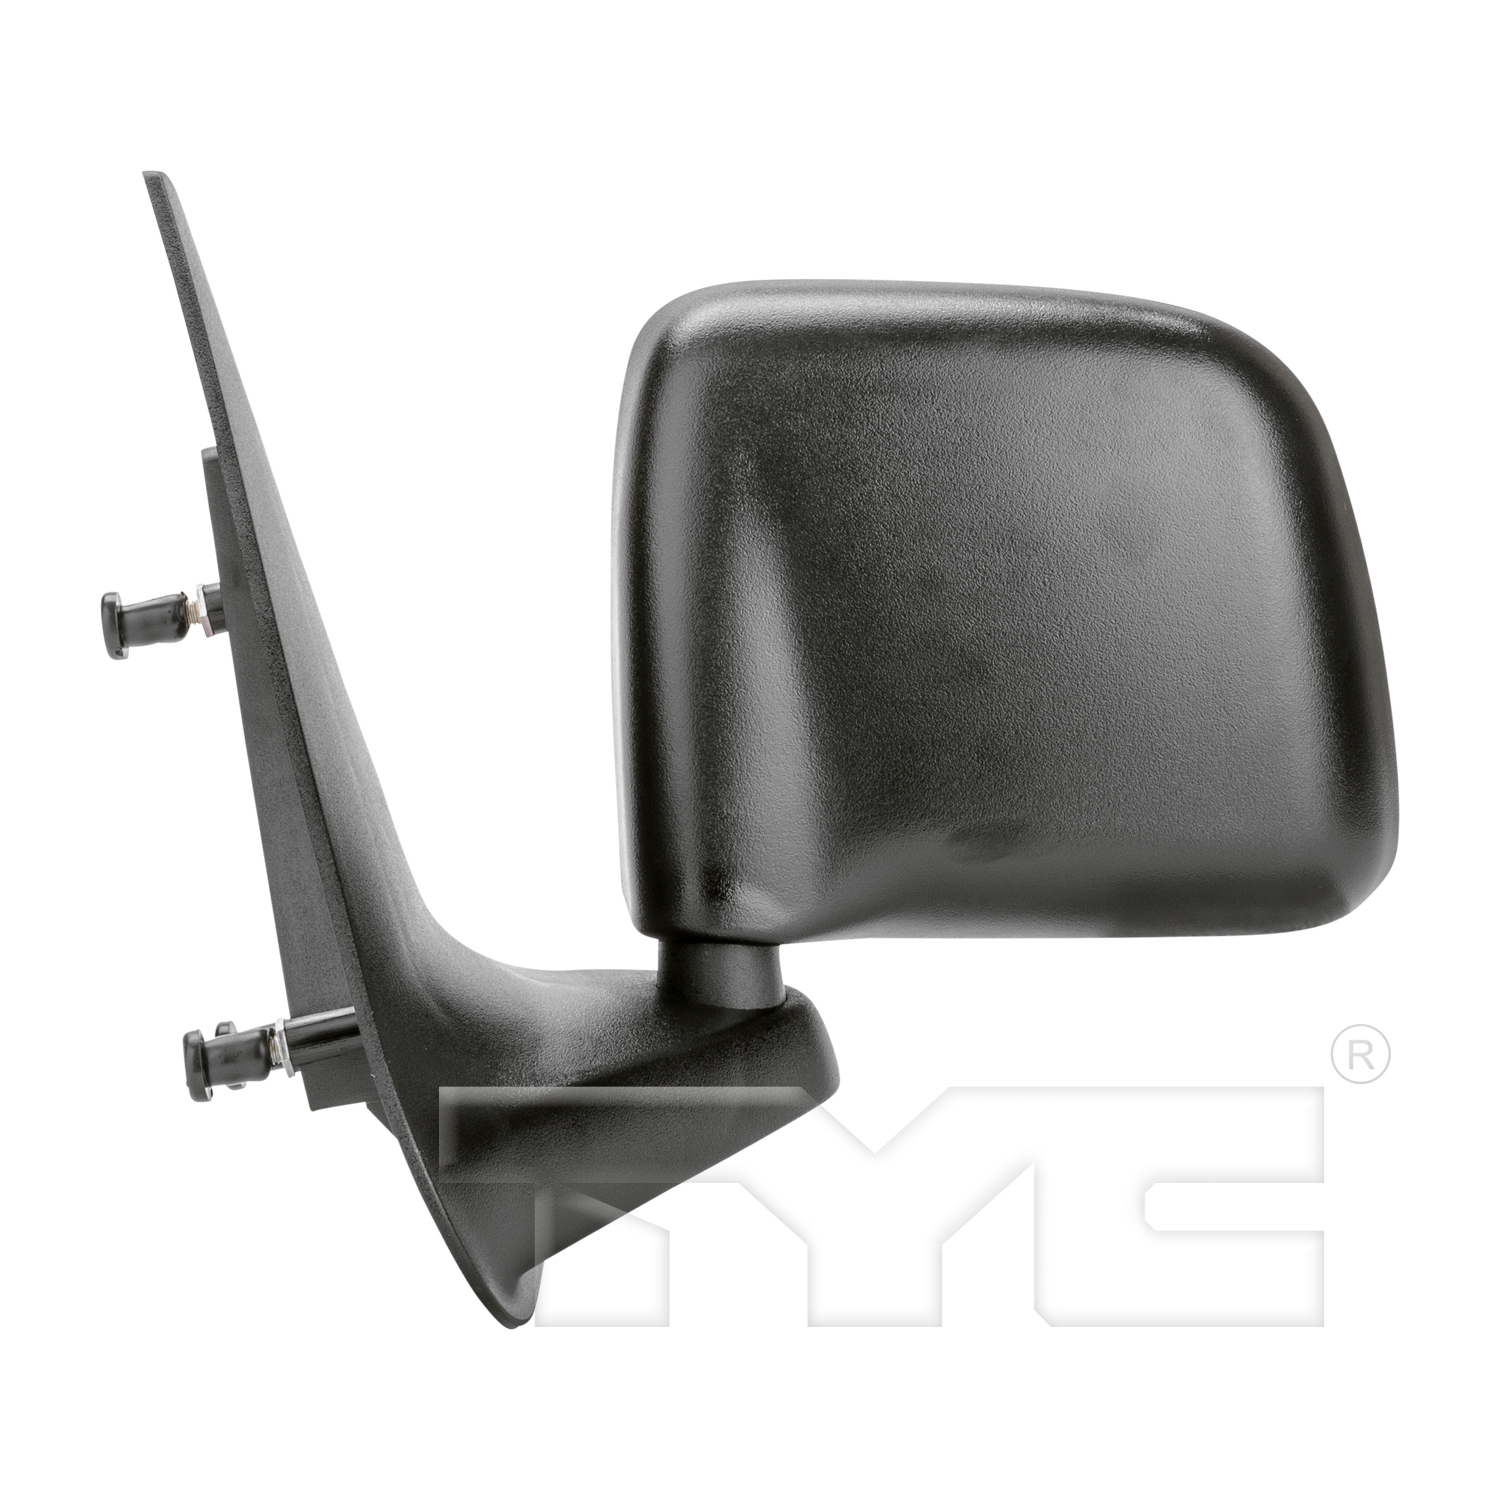 Aftermarket MIRRORS for FORD - RANGER, RANGER,93-05,LT Mirror outside rear view